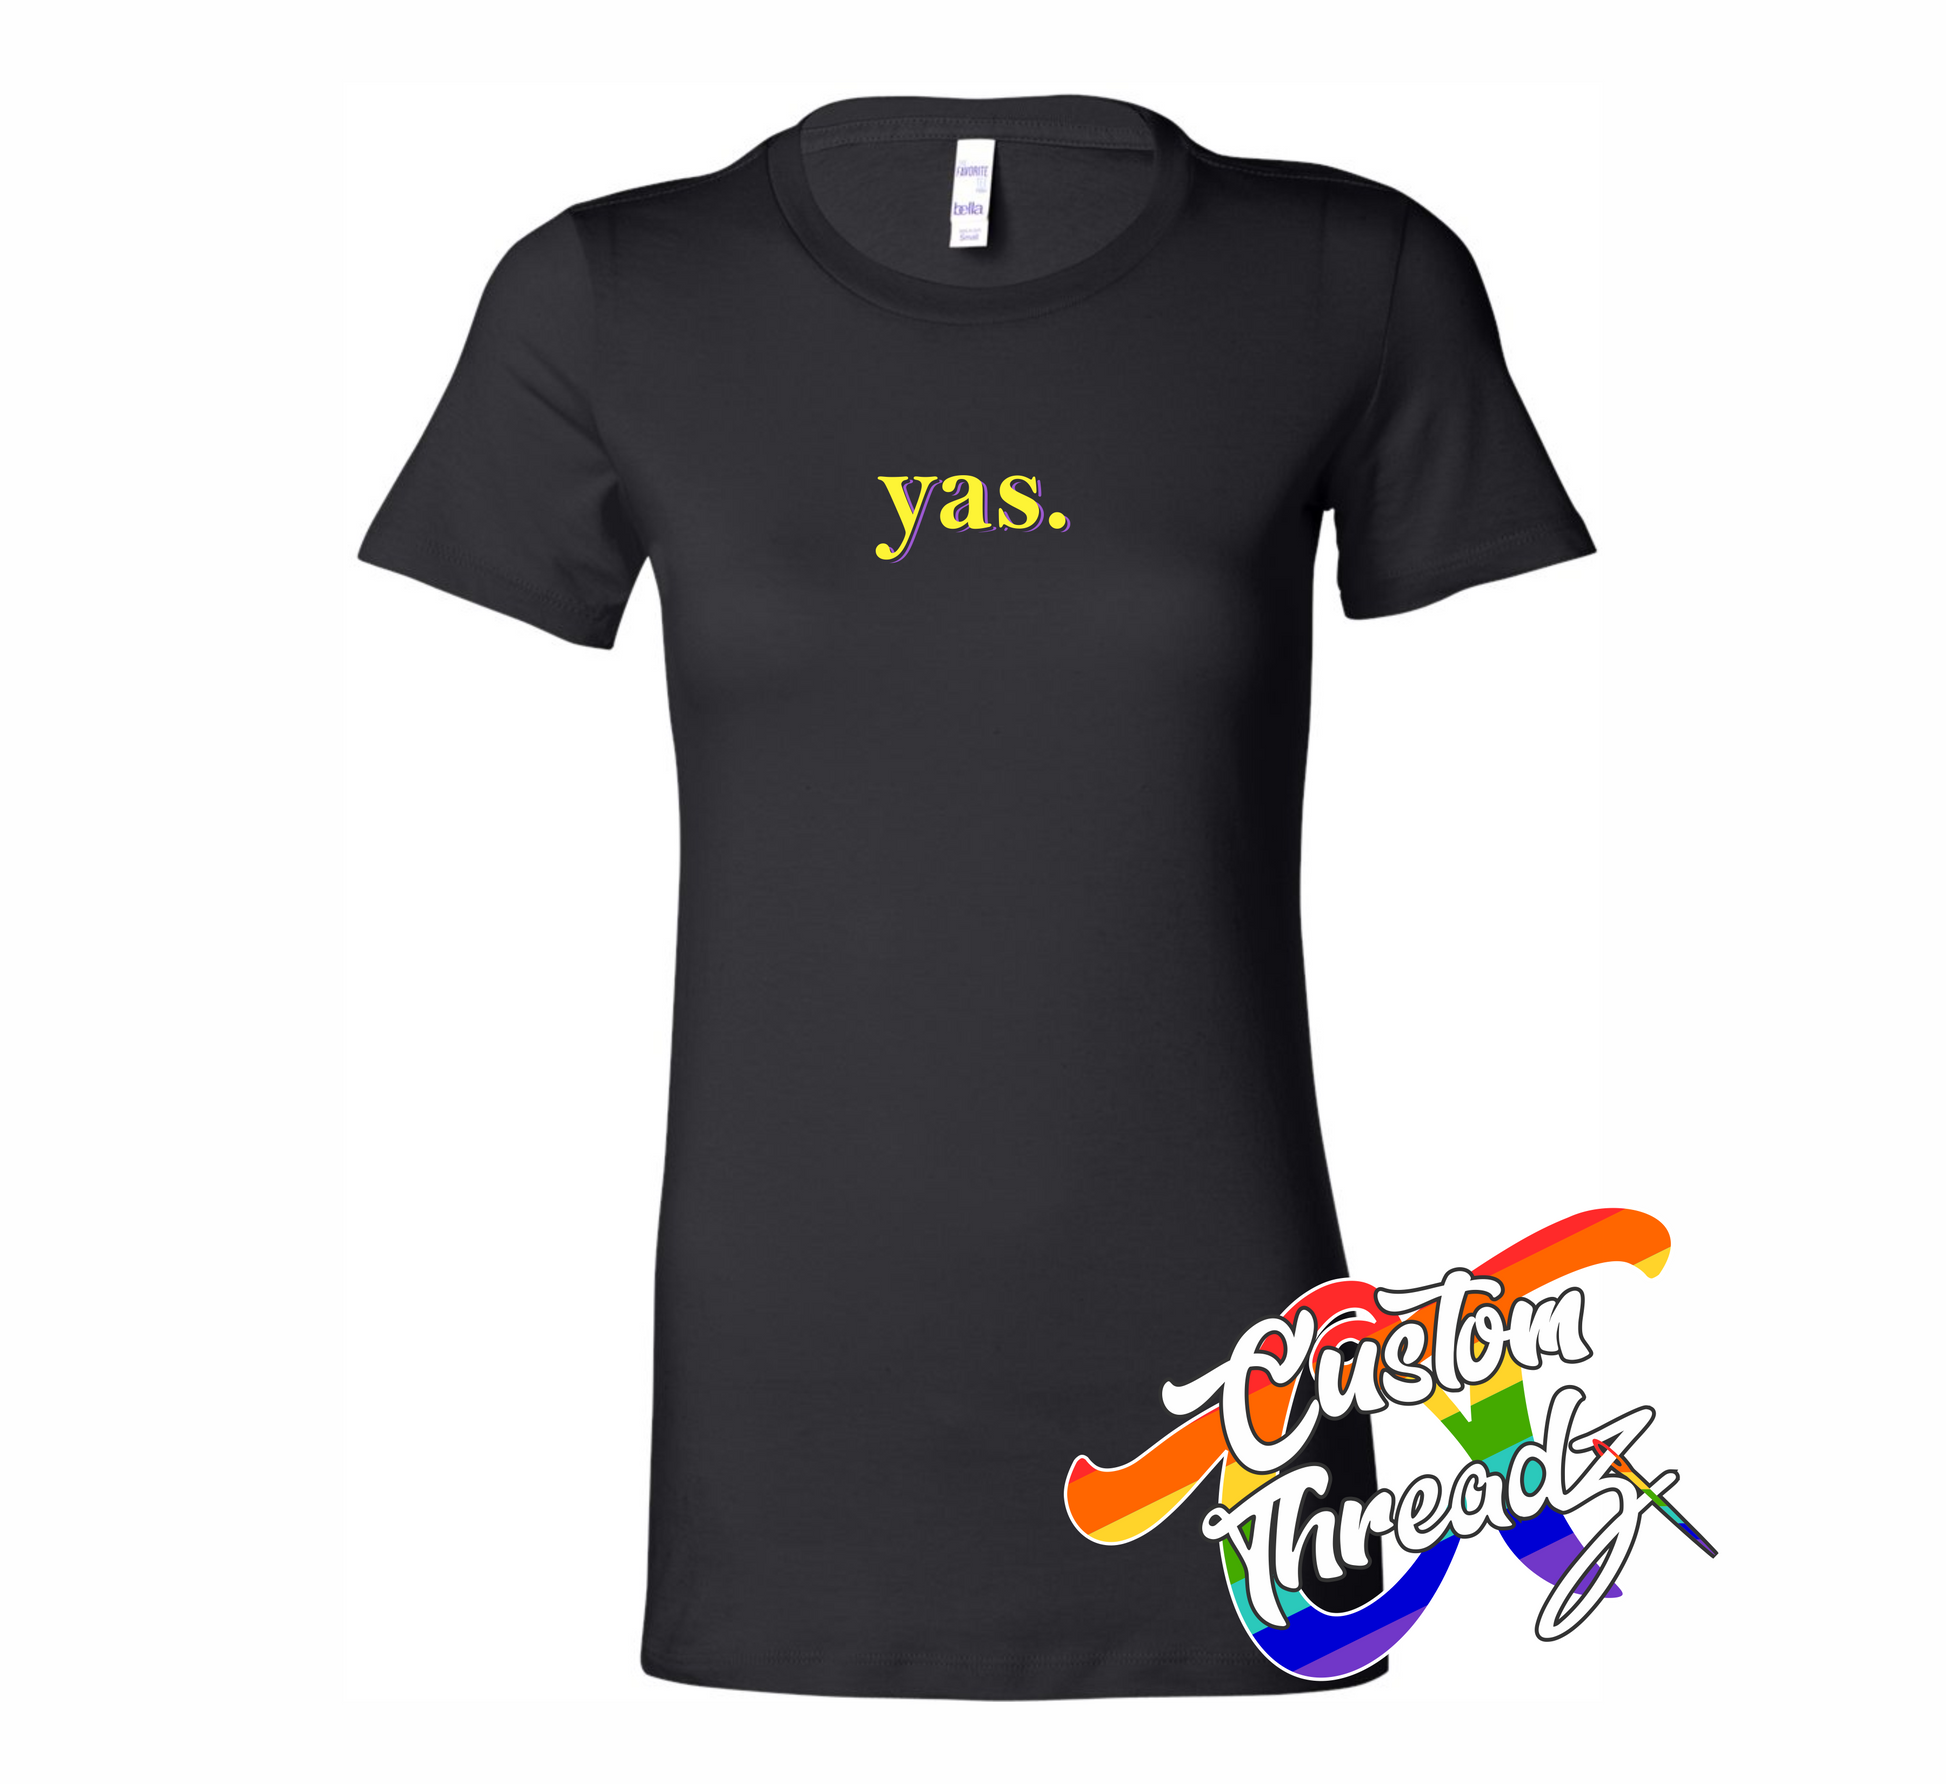 black womens tee with yas DTG printed design